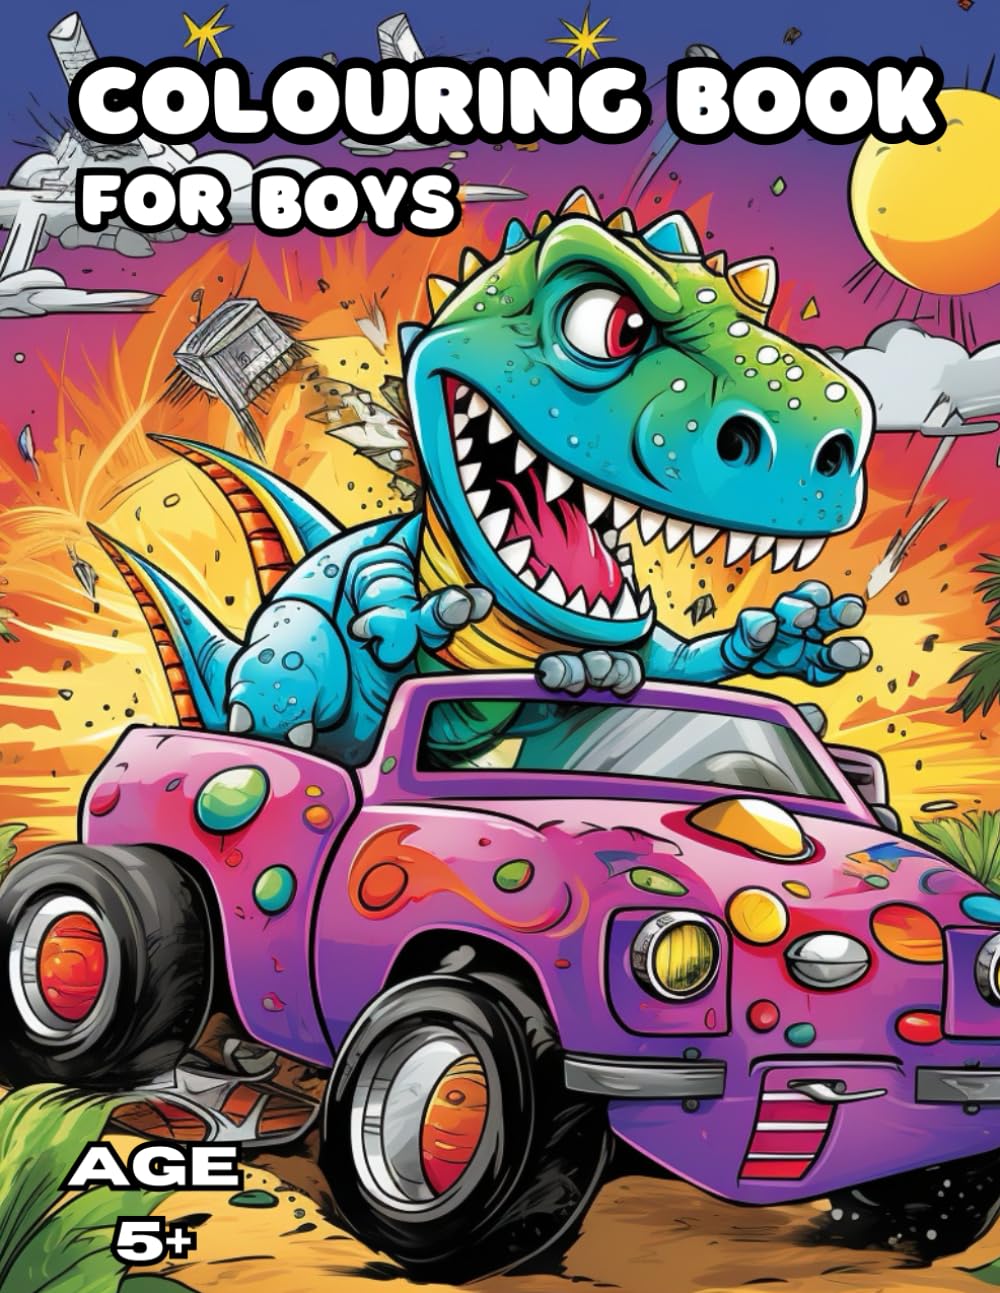 COLOURING BOOK FOR BOYS: 40 SINGLE SIDED ILLUSTRATIONS - INCLUDING DINOSAURS, TRACTORS, ALIENS, CARS, LORRIES, ROCKETS AND MORE!